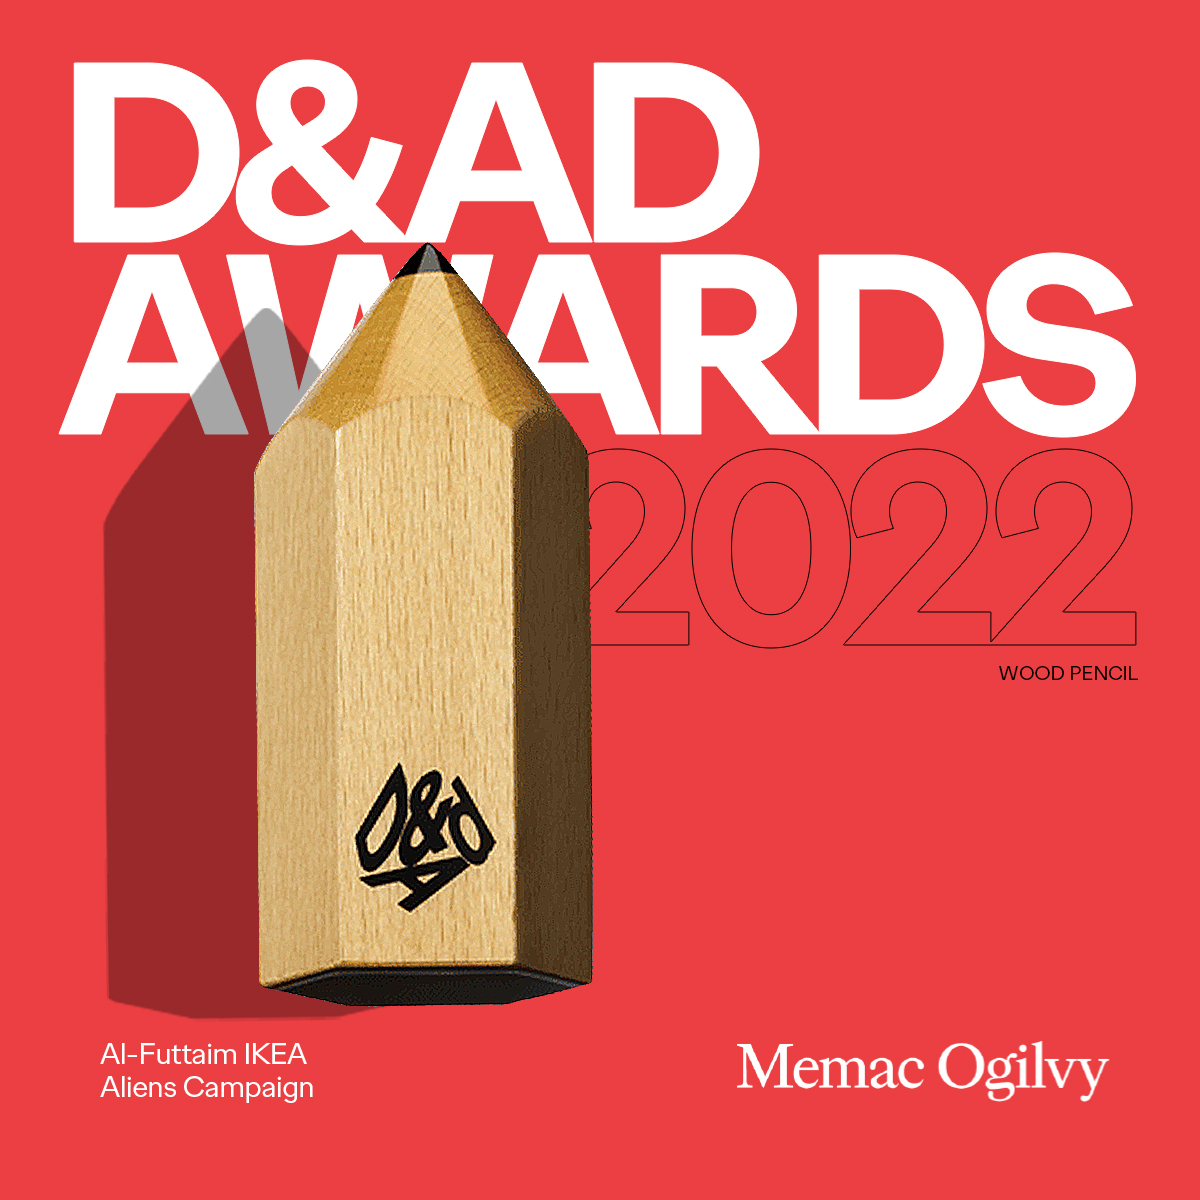 Incredibly happy to be adding this to our list. Wood pencil in D&Ad 2022 for the Al-Futtaim IKEA Aliens campaign. Thank you to our impassioned teams & clients for bringing great ideas to life. @IKEAUAE #IKEAUAE #MemacOgilvy #TogetherWeWin